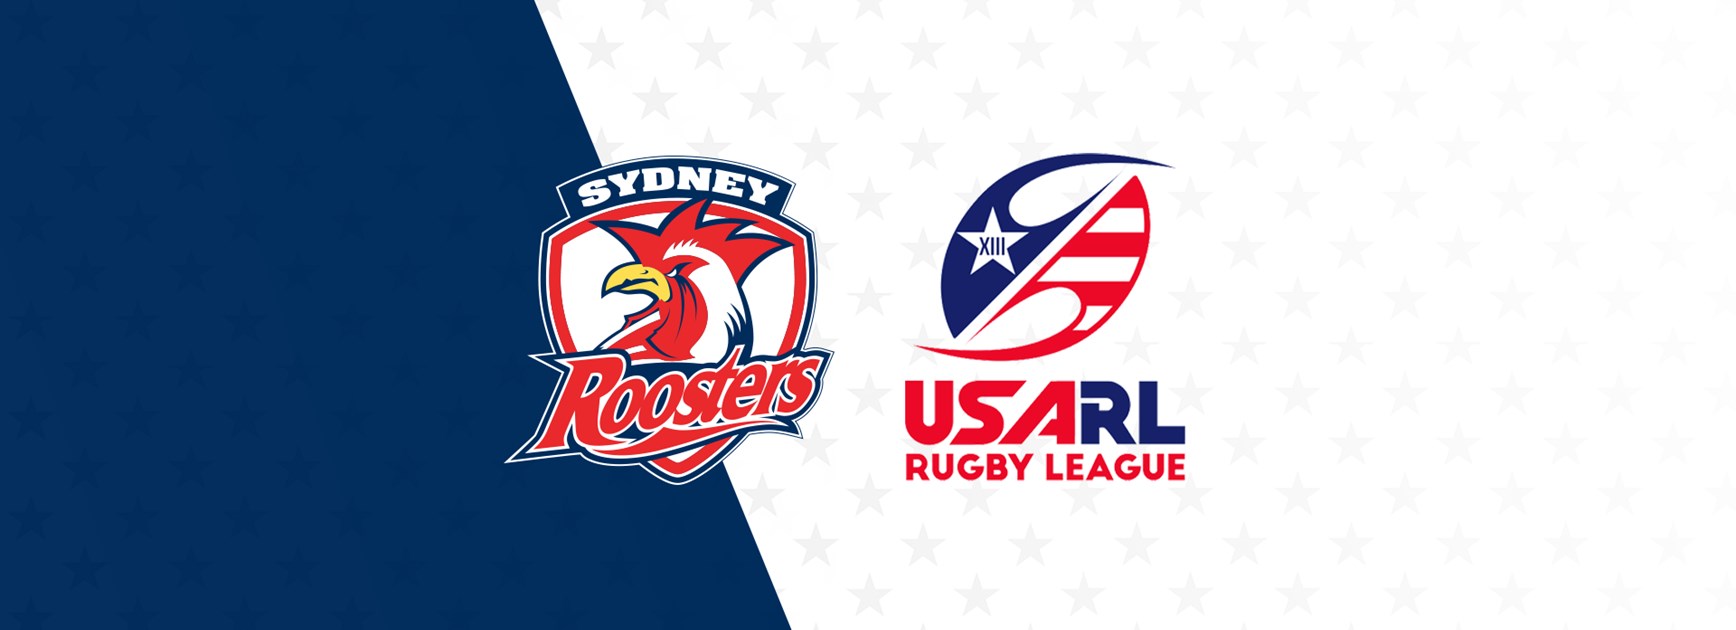 Joe Kelly Appointed to USA Rugby League Board